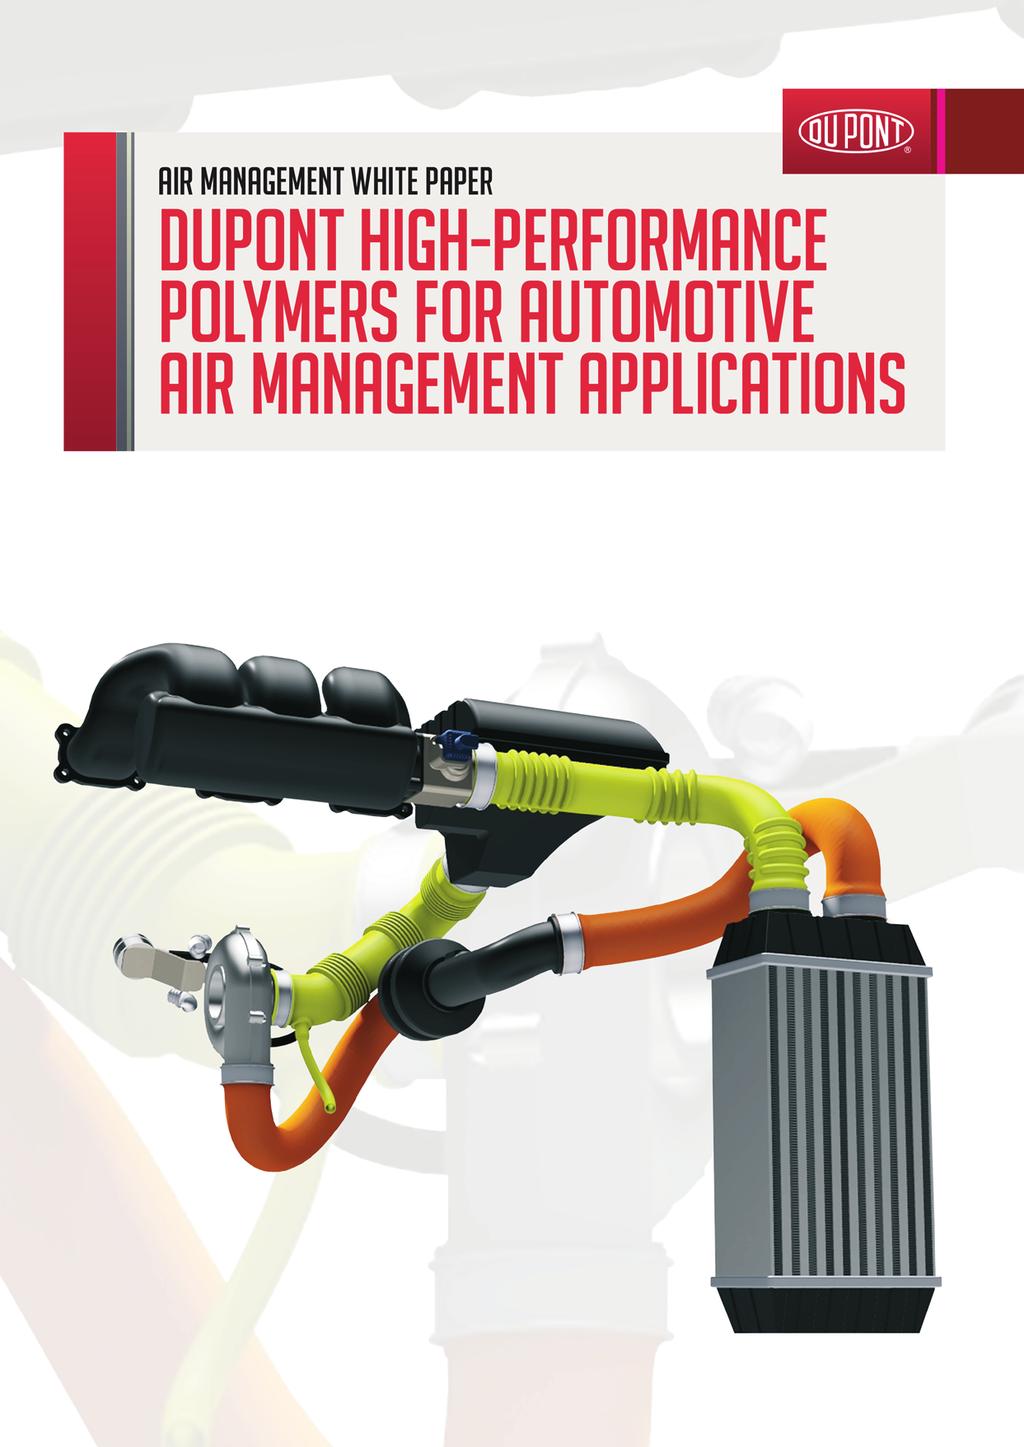 HOW TO MEET THE LATEST ENGINE PERFORMANCE, EMISSIONS AND LIGHTWEIGHTING CHALLENGES WITH DUPONT RIGID AND FLEXIBLE POLYMERS A WHITE PAPER GUIDE FOR DESIGN ENGINEERS AND MATERIAL SPECIFIERS This is an